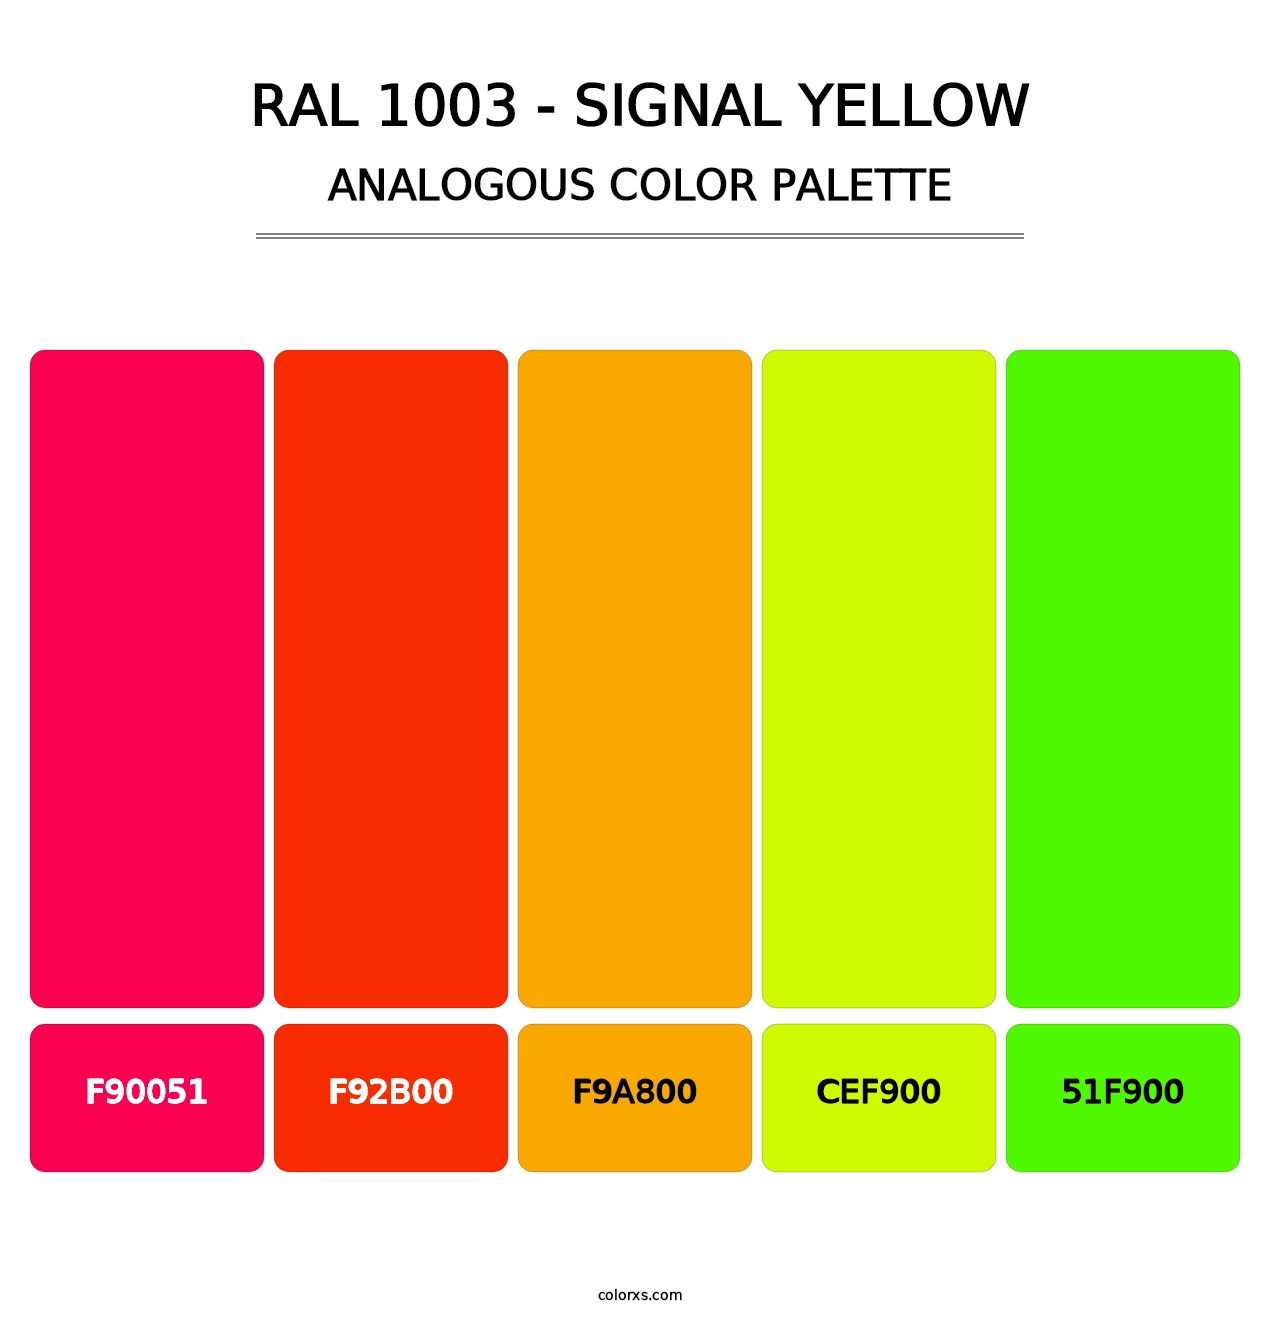 RAL 1003 - Signal Yellow - Analogous Color Palette